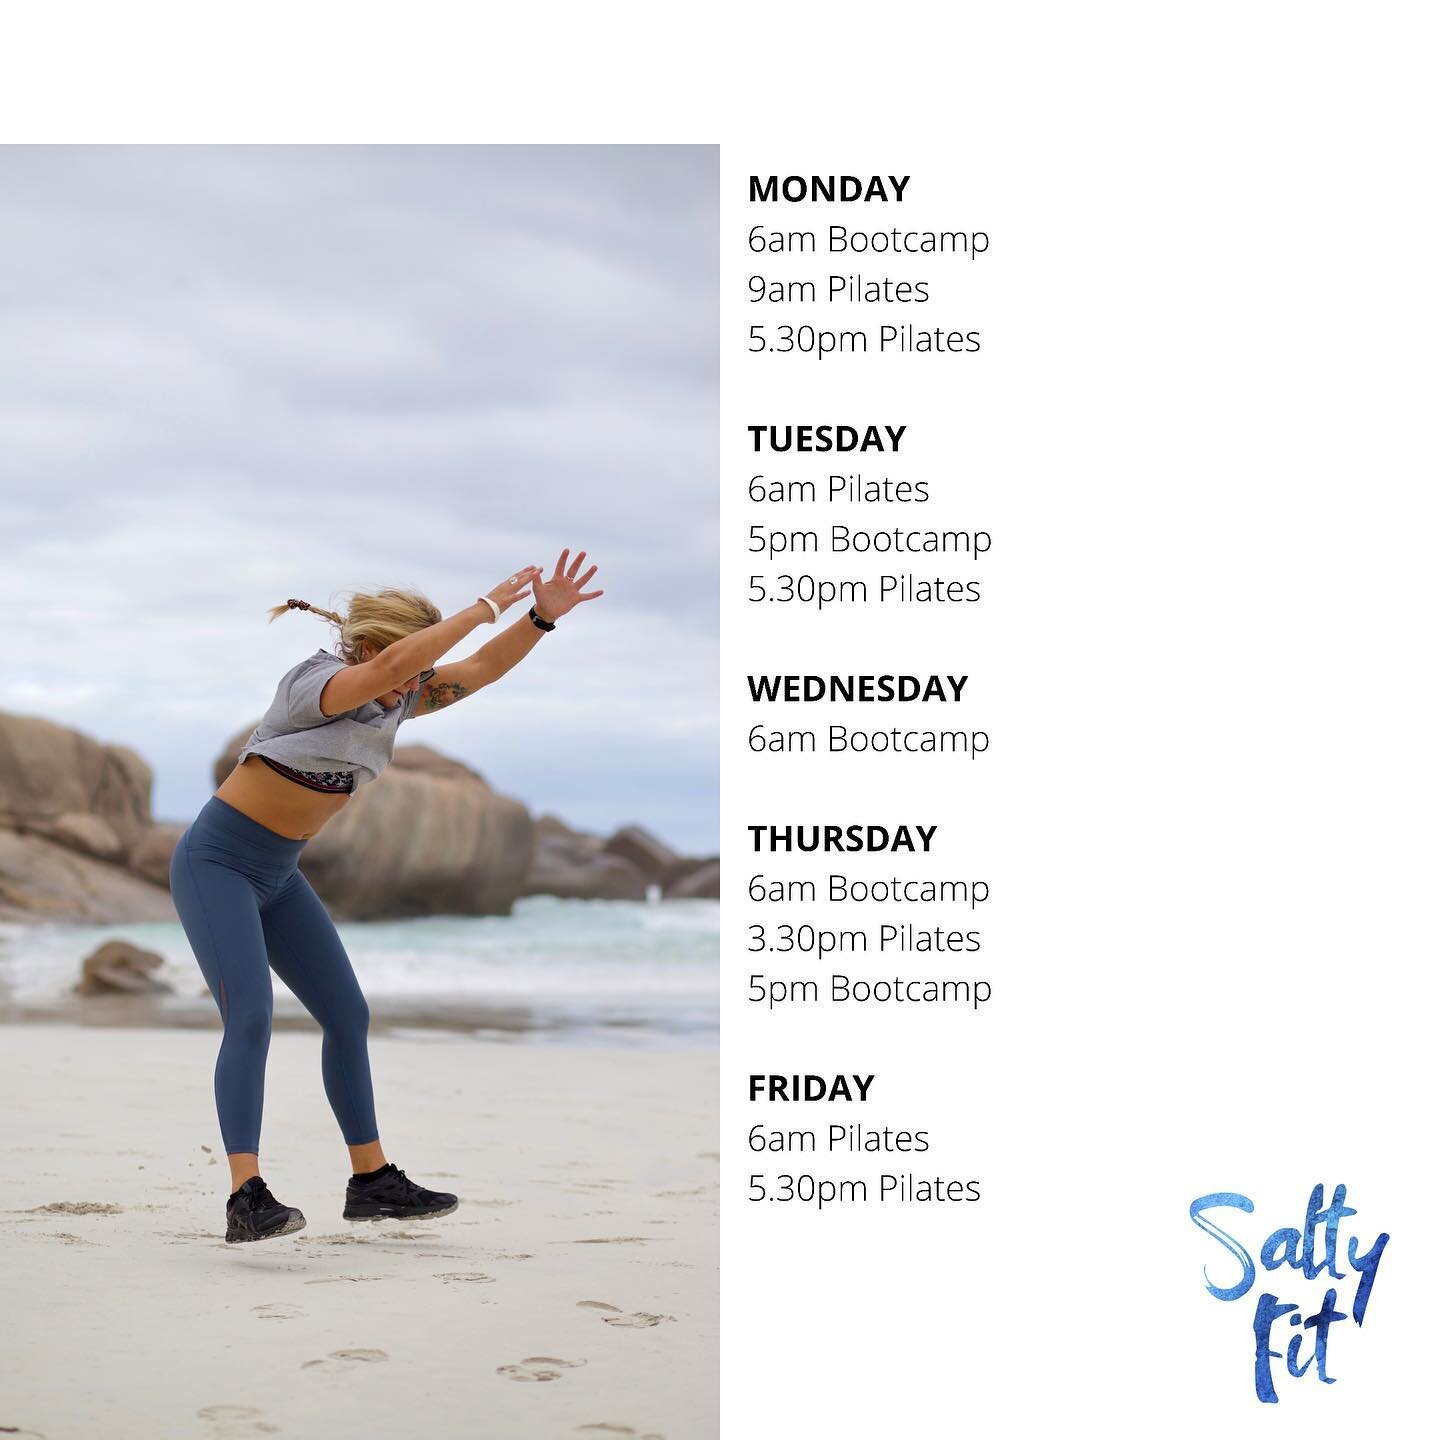 NEW TIMETABLE 🌻 Commencing Monday the 19th. 
Please book in for all Pilates classes as limited spots are available. Check out website for all information on classes, signing up and more! www.saltyfitpersonaltraining.com